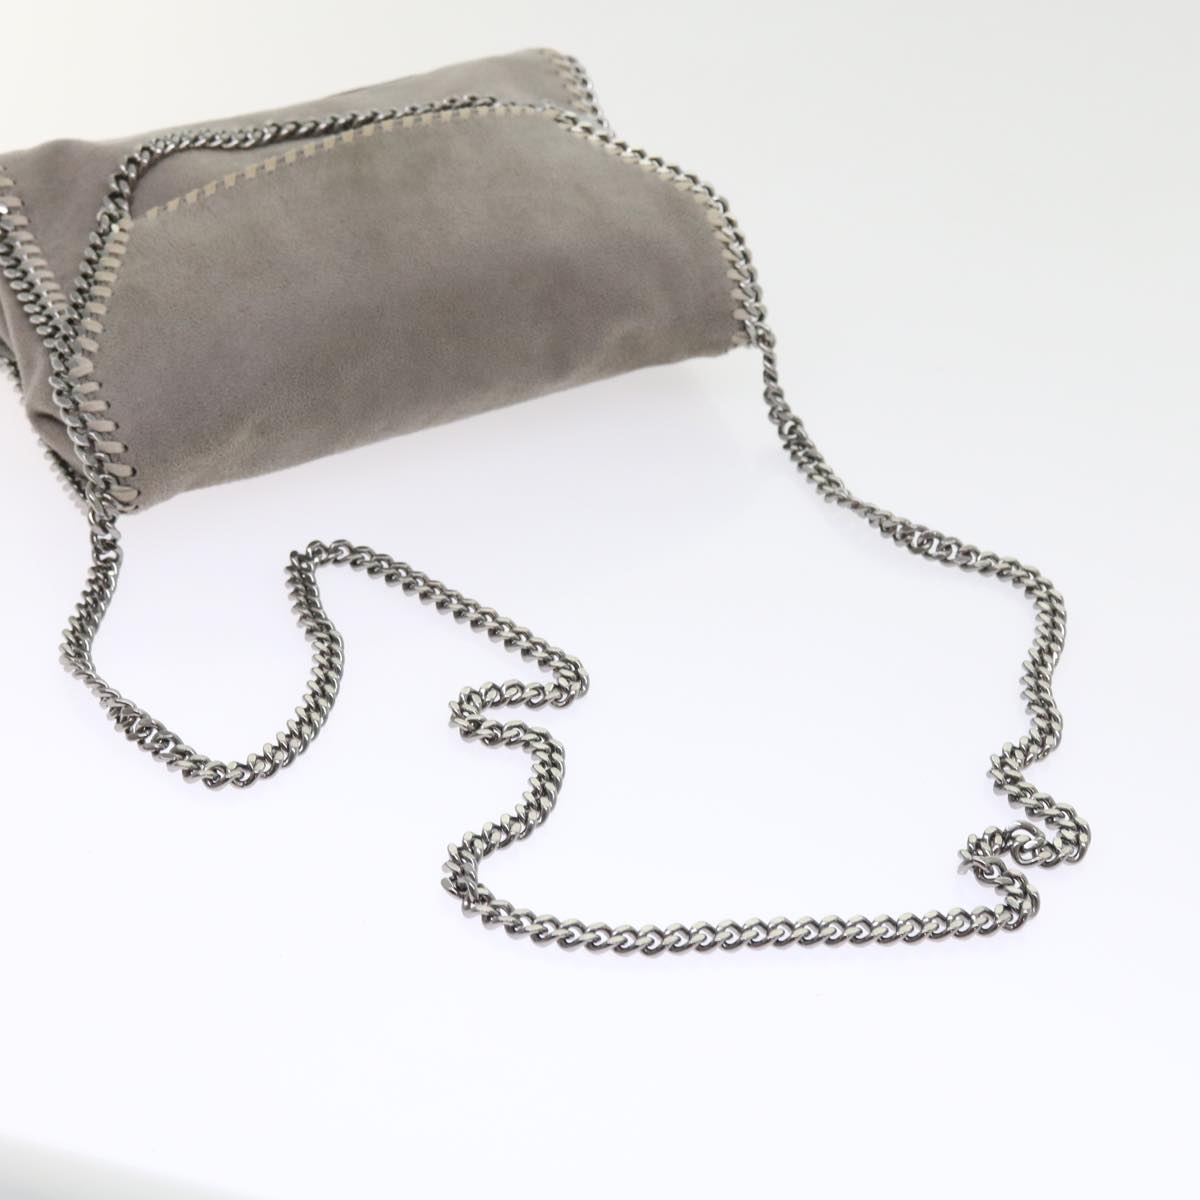 Stella MacCartney Chain Shoulder Bag Suede Gray 364519 Auth bs8624